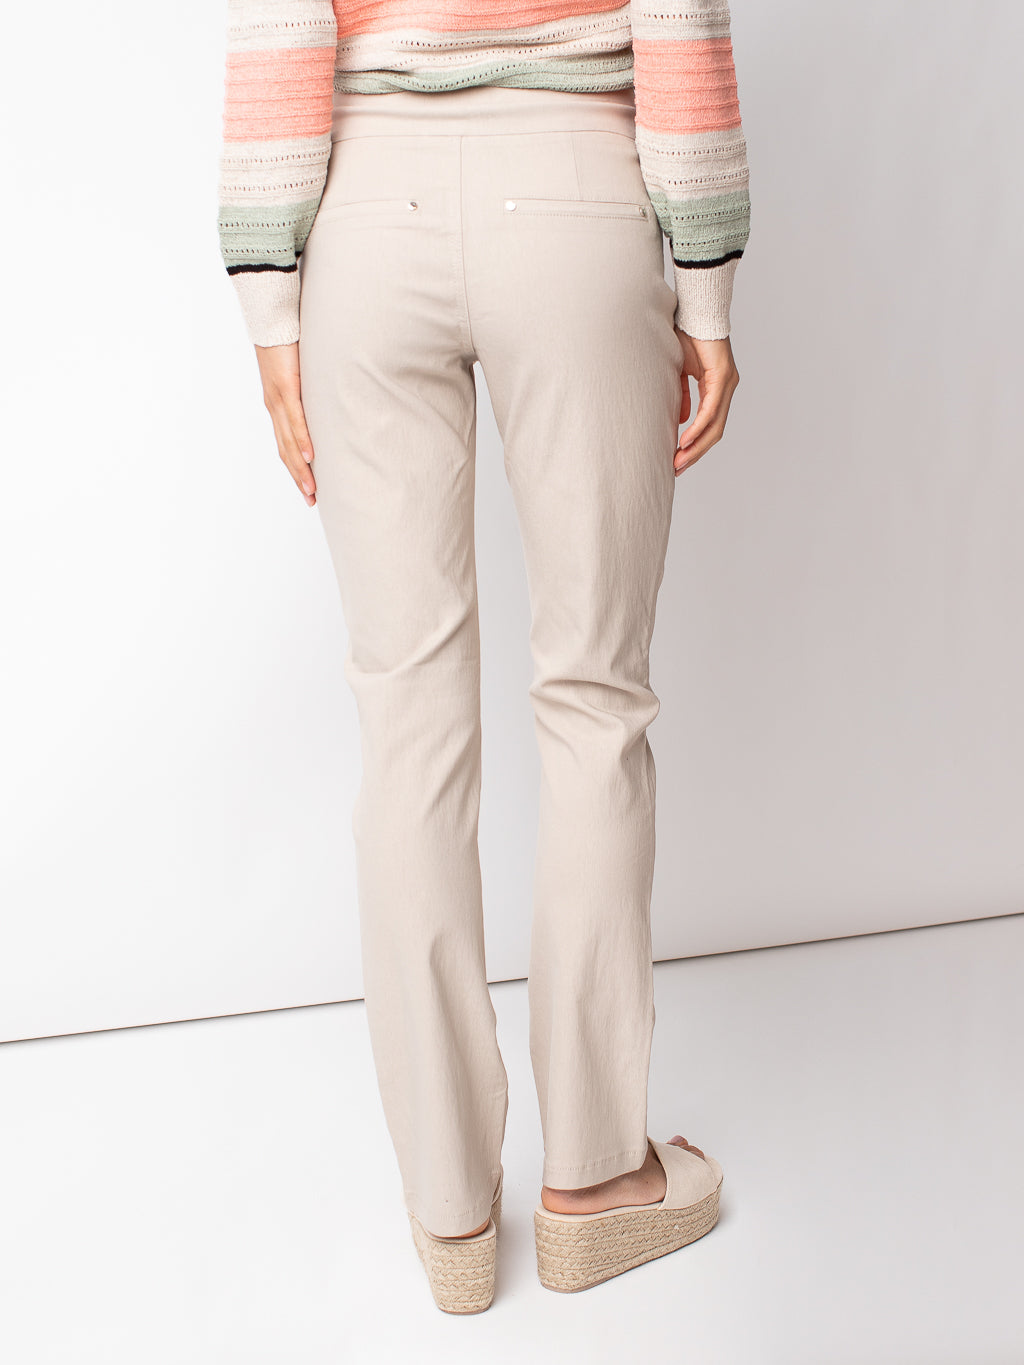 Fitted casual pull-on pant